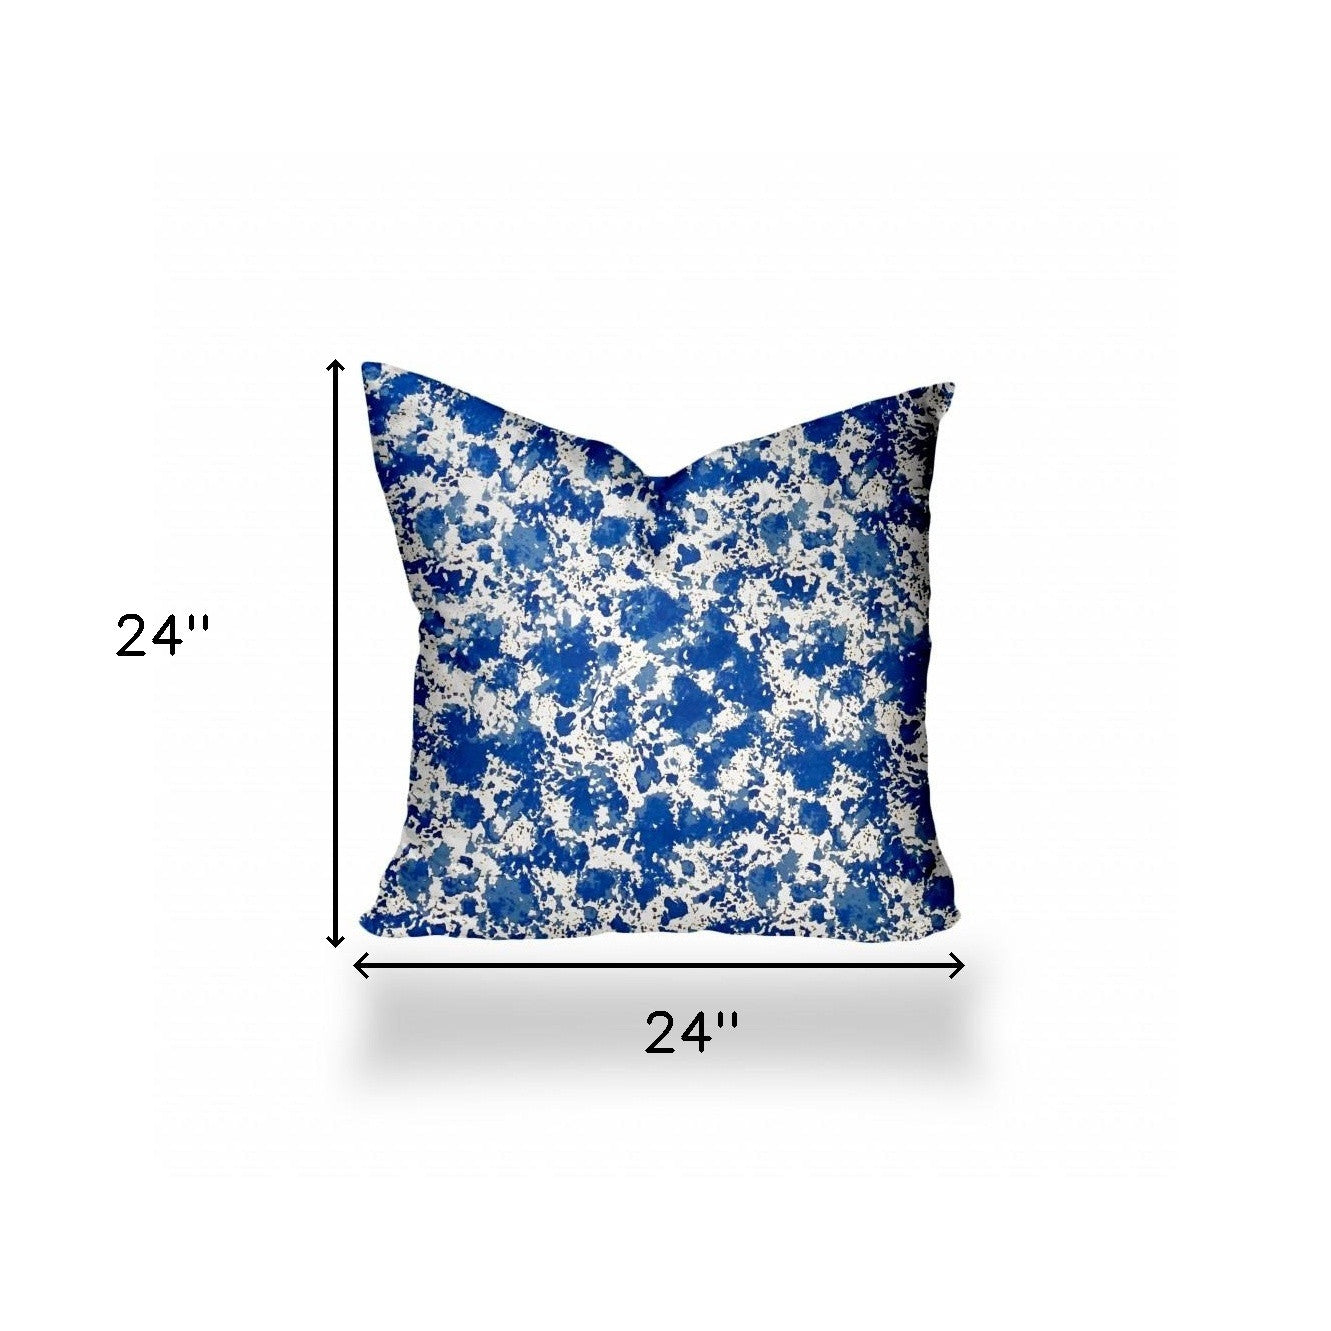 24" X 24" Blue And White Zippered Coastal Throw Indoor Outdoor Pillow Cover